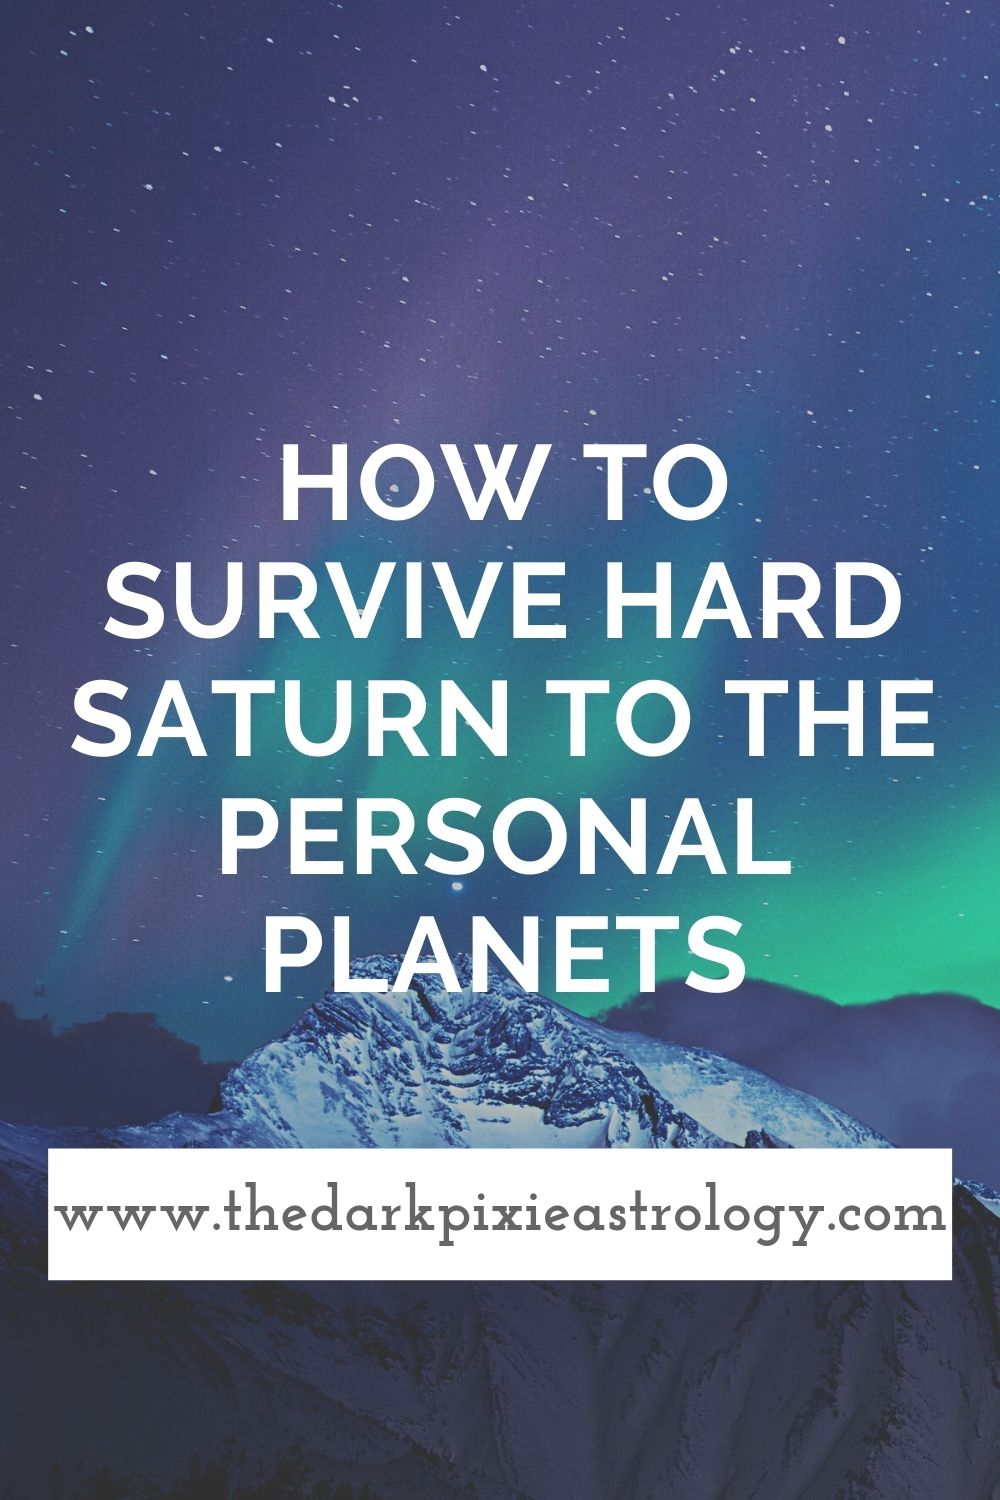 How to Survive Hard Saturn to the Personal Planets - The Dark Pixie Astrology